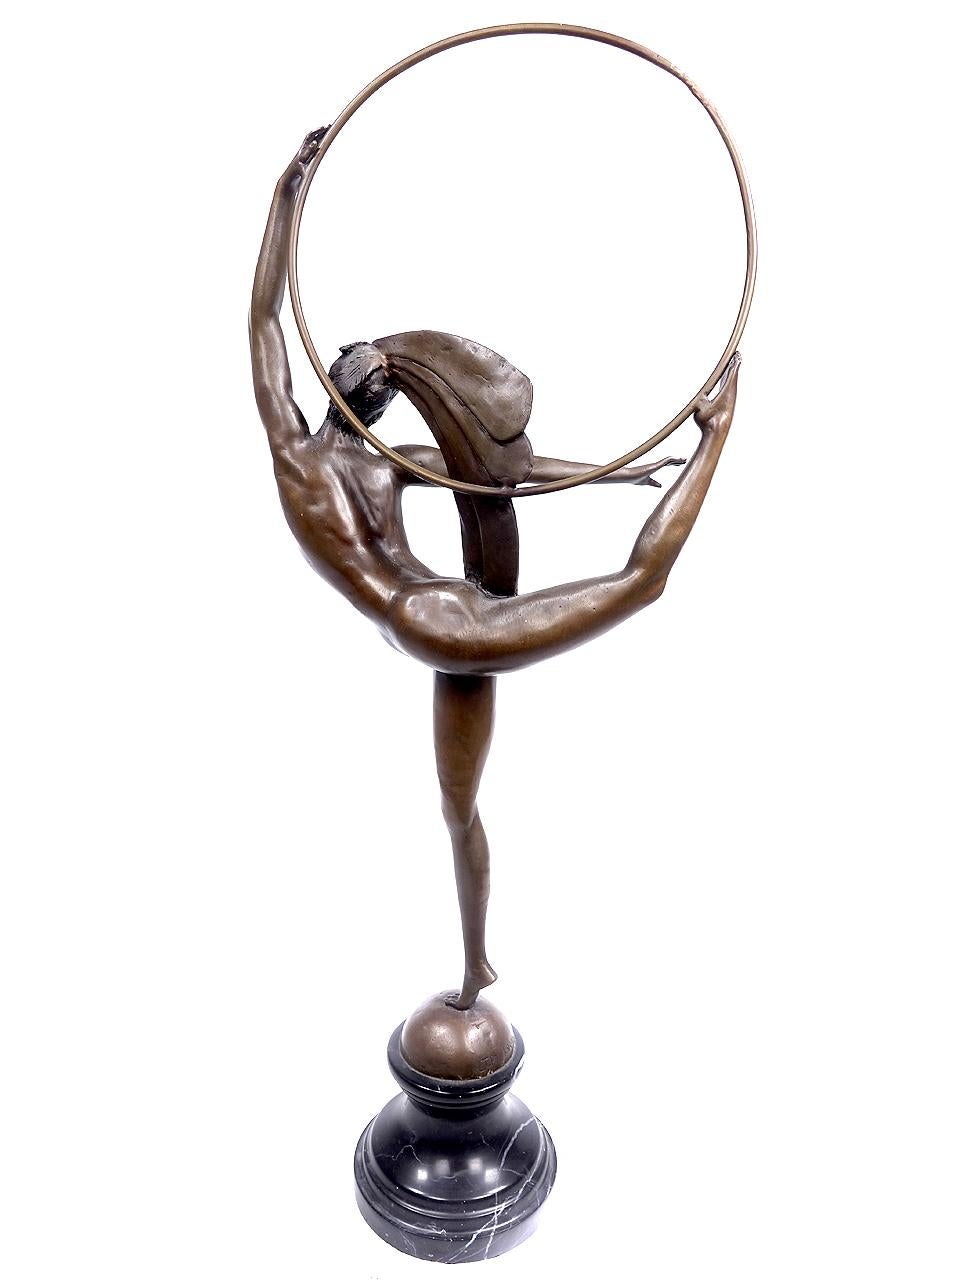 This bronze is of a highly detailed figurine, of a naked dancer, perfectly balanced on one leg, holding a hoop and with elaborate period headdress. It is signed J. P. Morante. The artist J P Morante (1882-1960) was a famous French Art Deco sculptor.